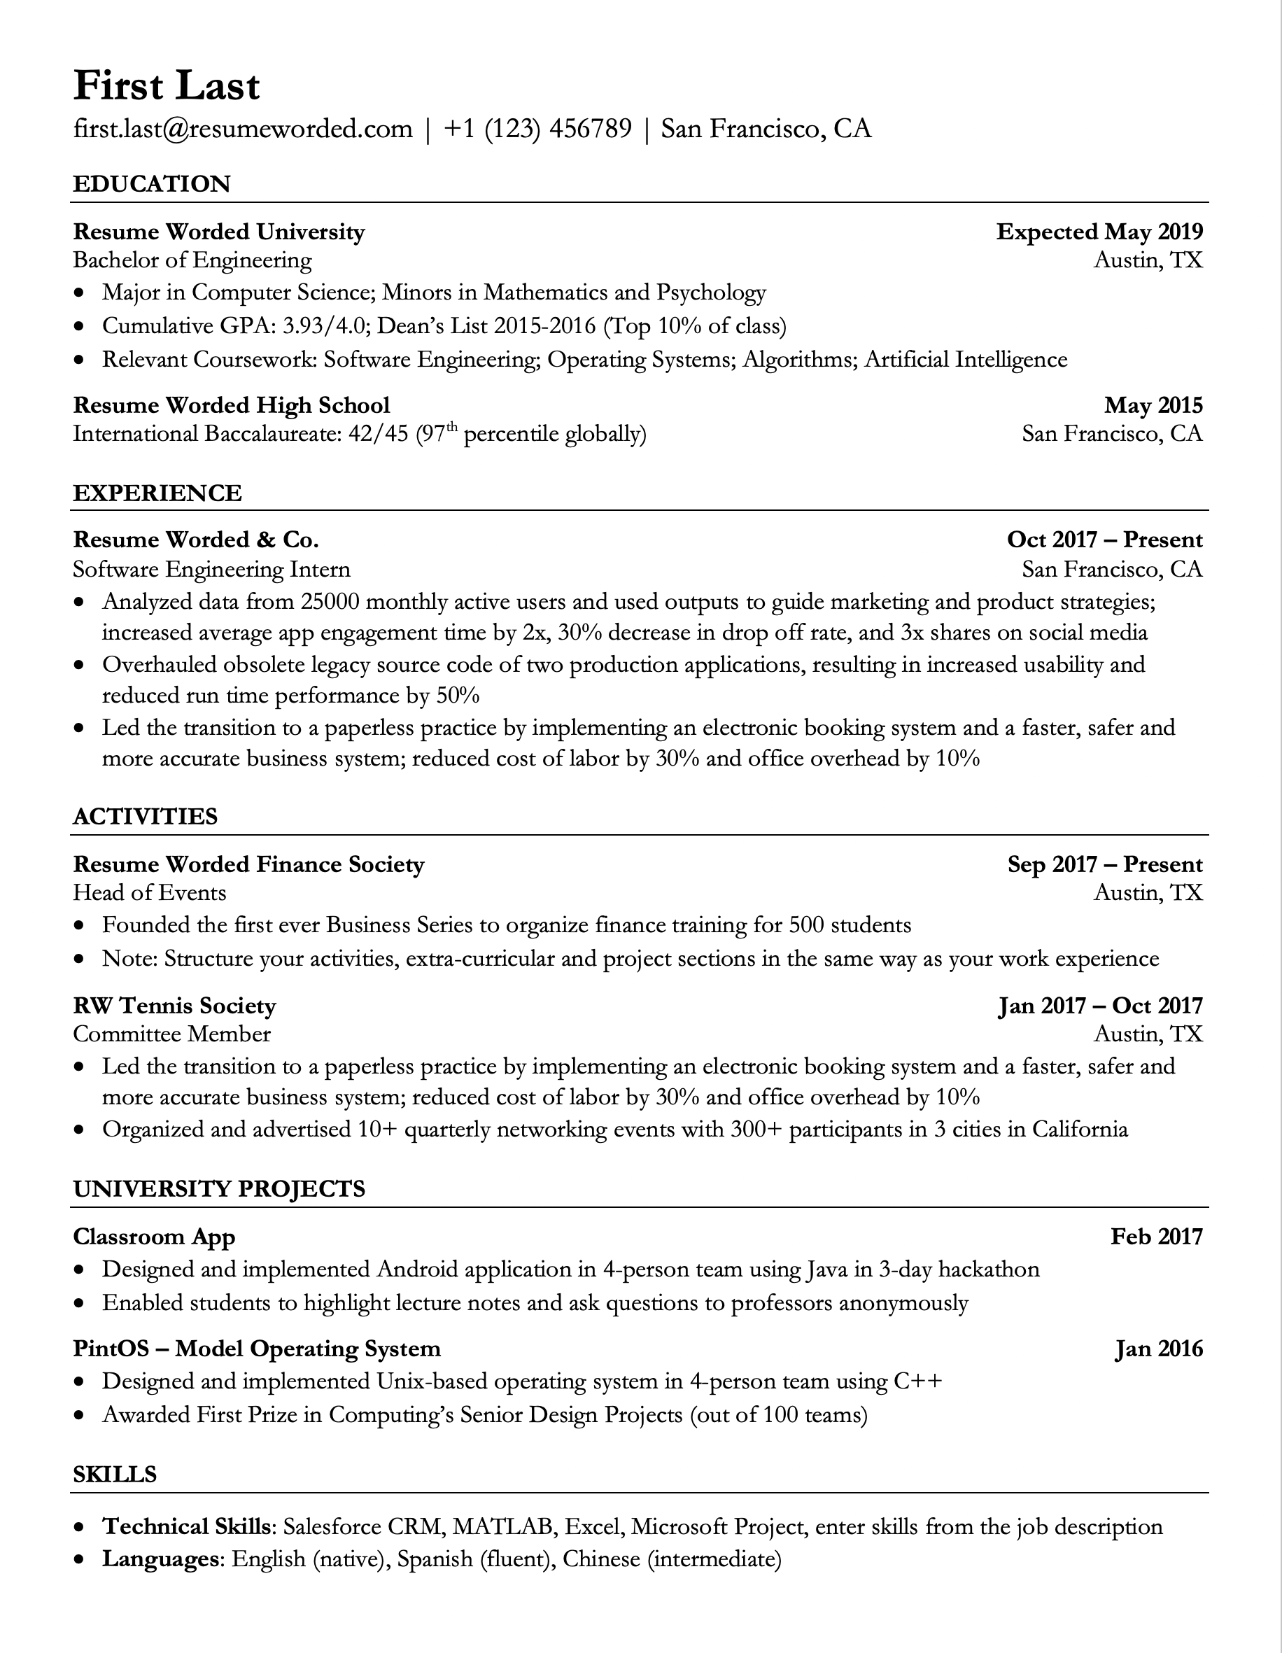 Professional resume template for students with projects